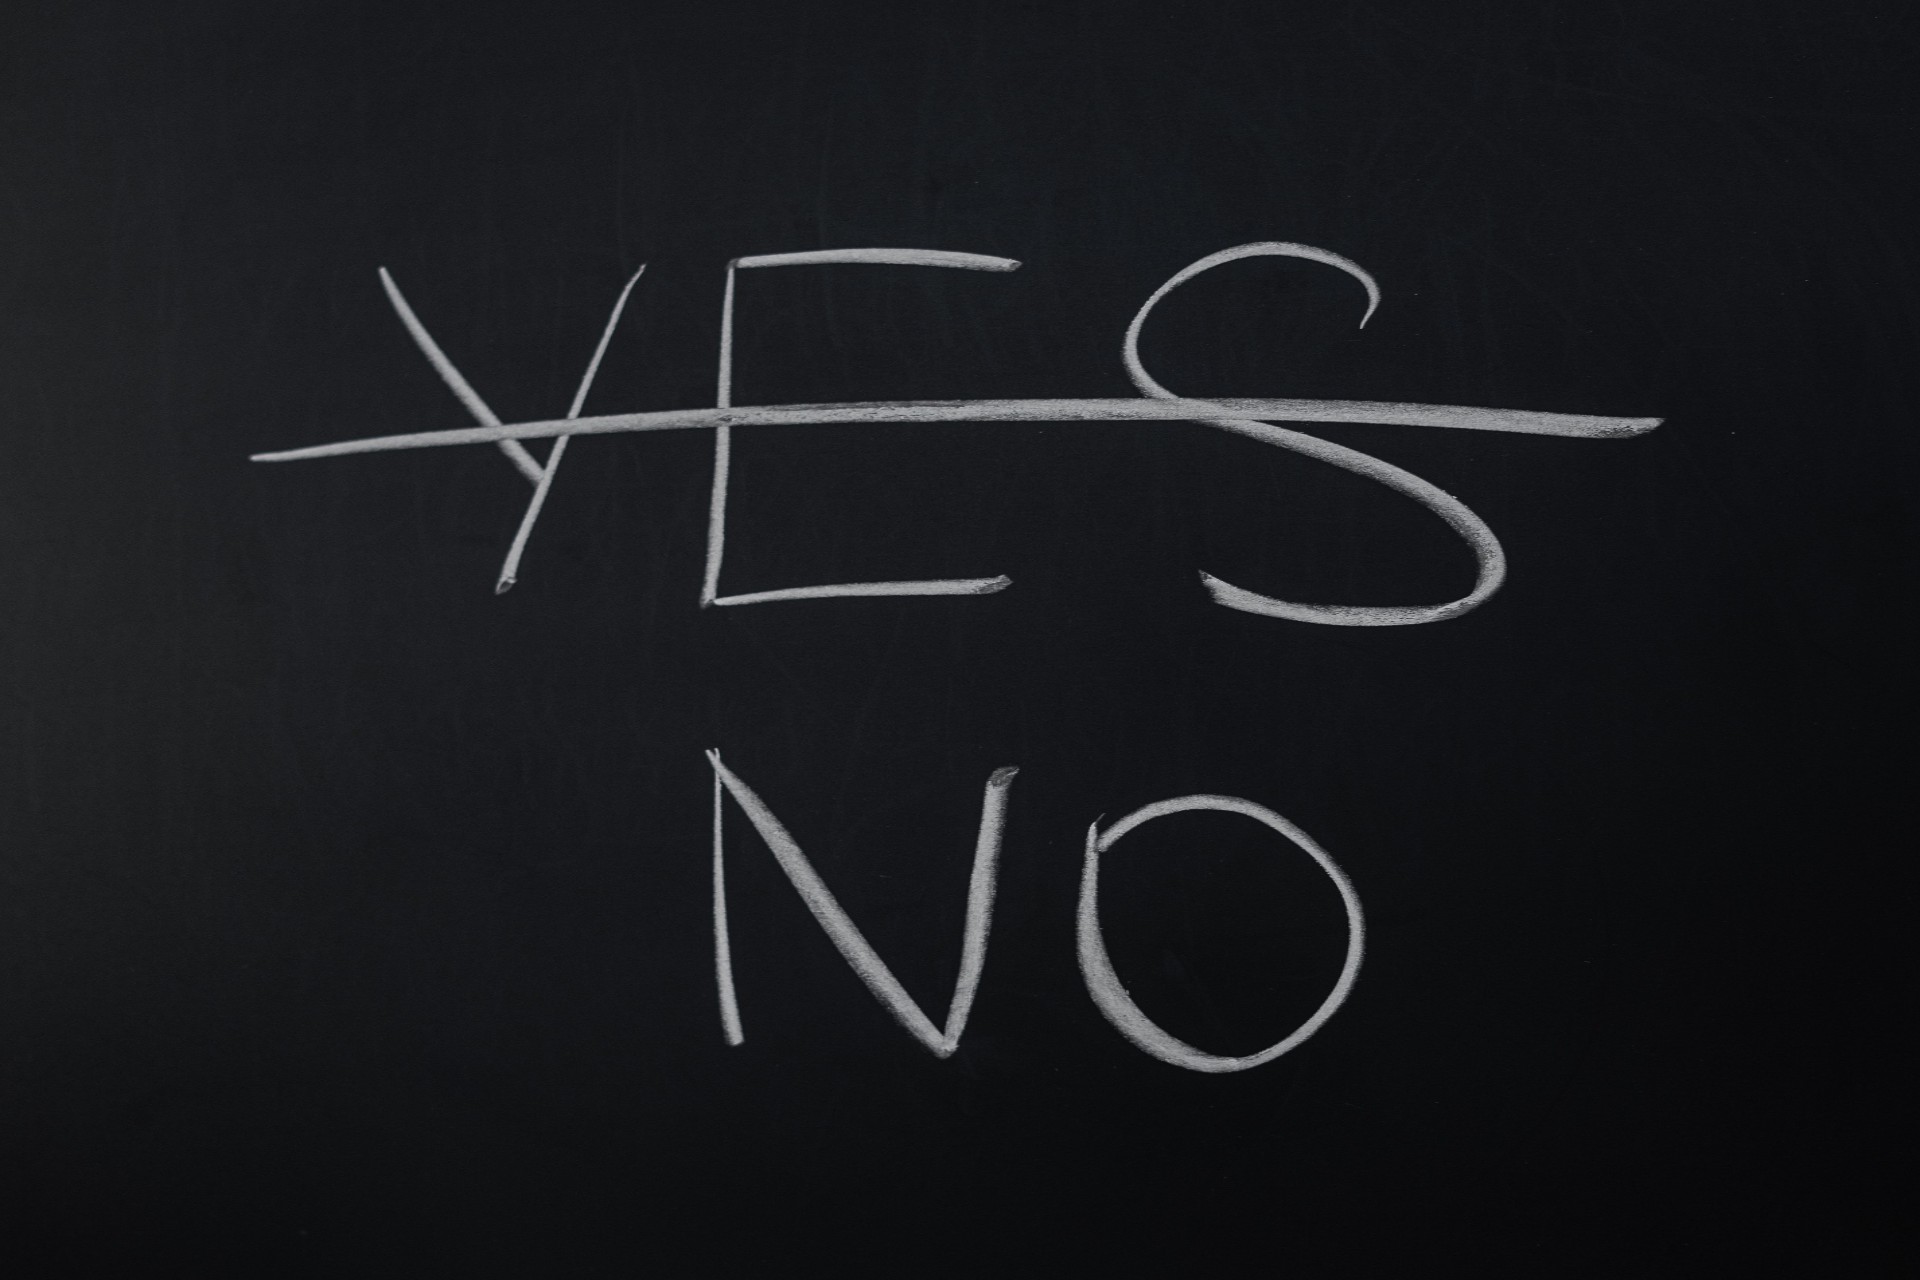 Saying "No" is often more complicated than it seems. Why saying "No" isn't the best thing you can do this year—and what you should do instead.